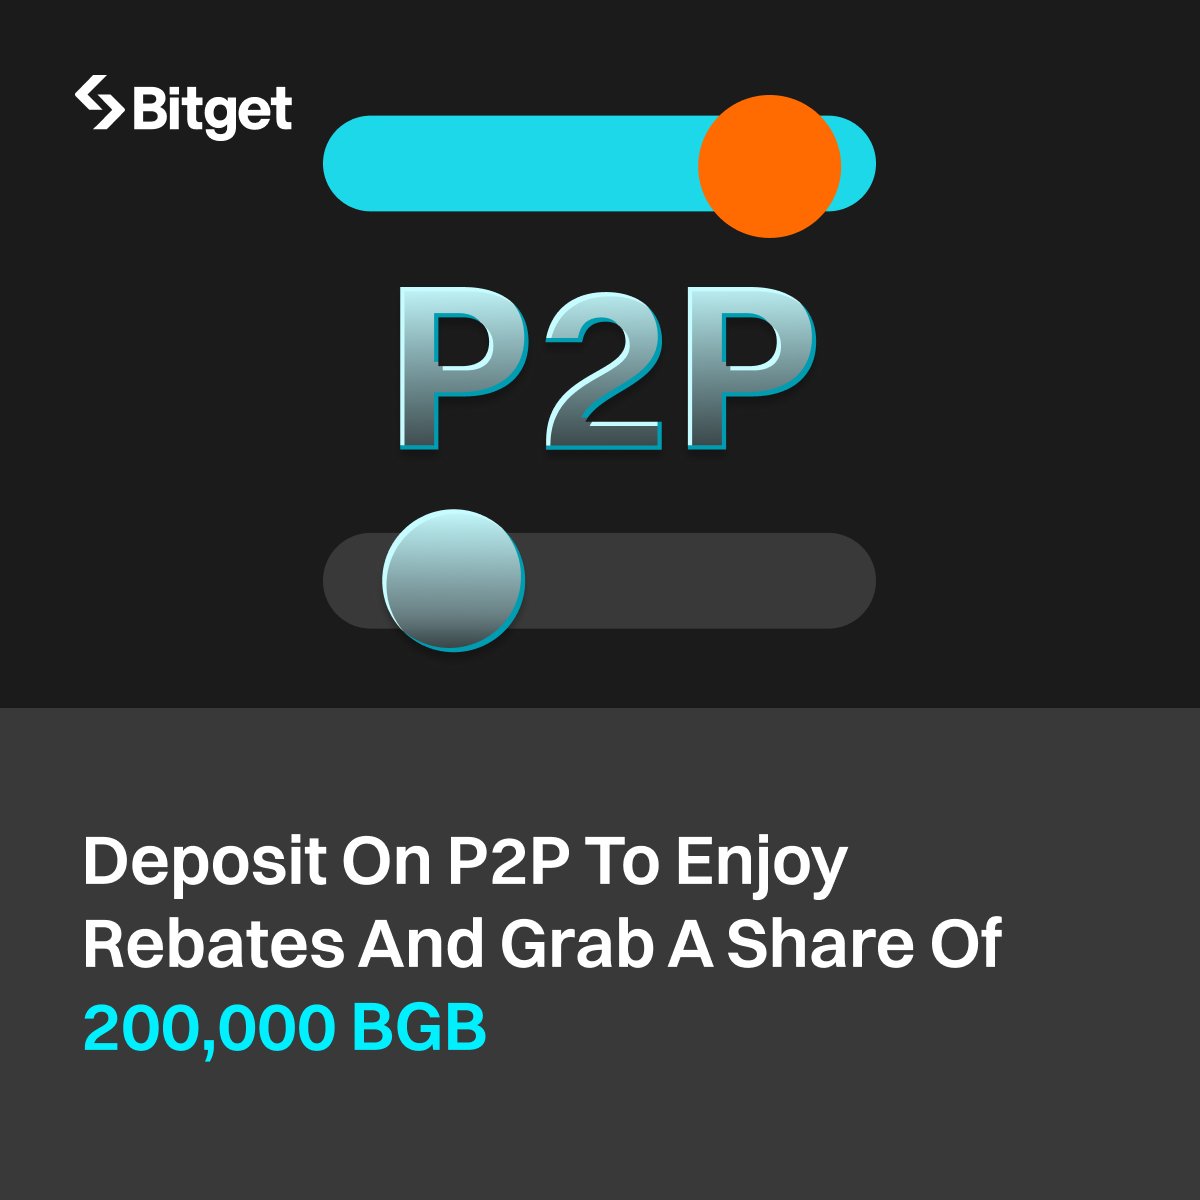 🎁 Unlock exclusive rewards for new P2P users. Grab the chance to easily share 200,000 $BGB!

📅Ends on Apr 28, 14:00 (UTC)

👉Join now: partner.bitget.com/bg/4L5WGR